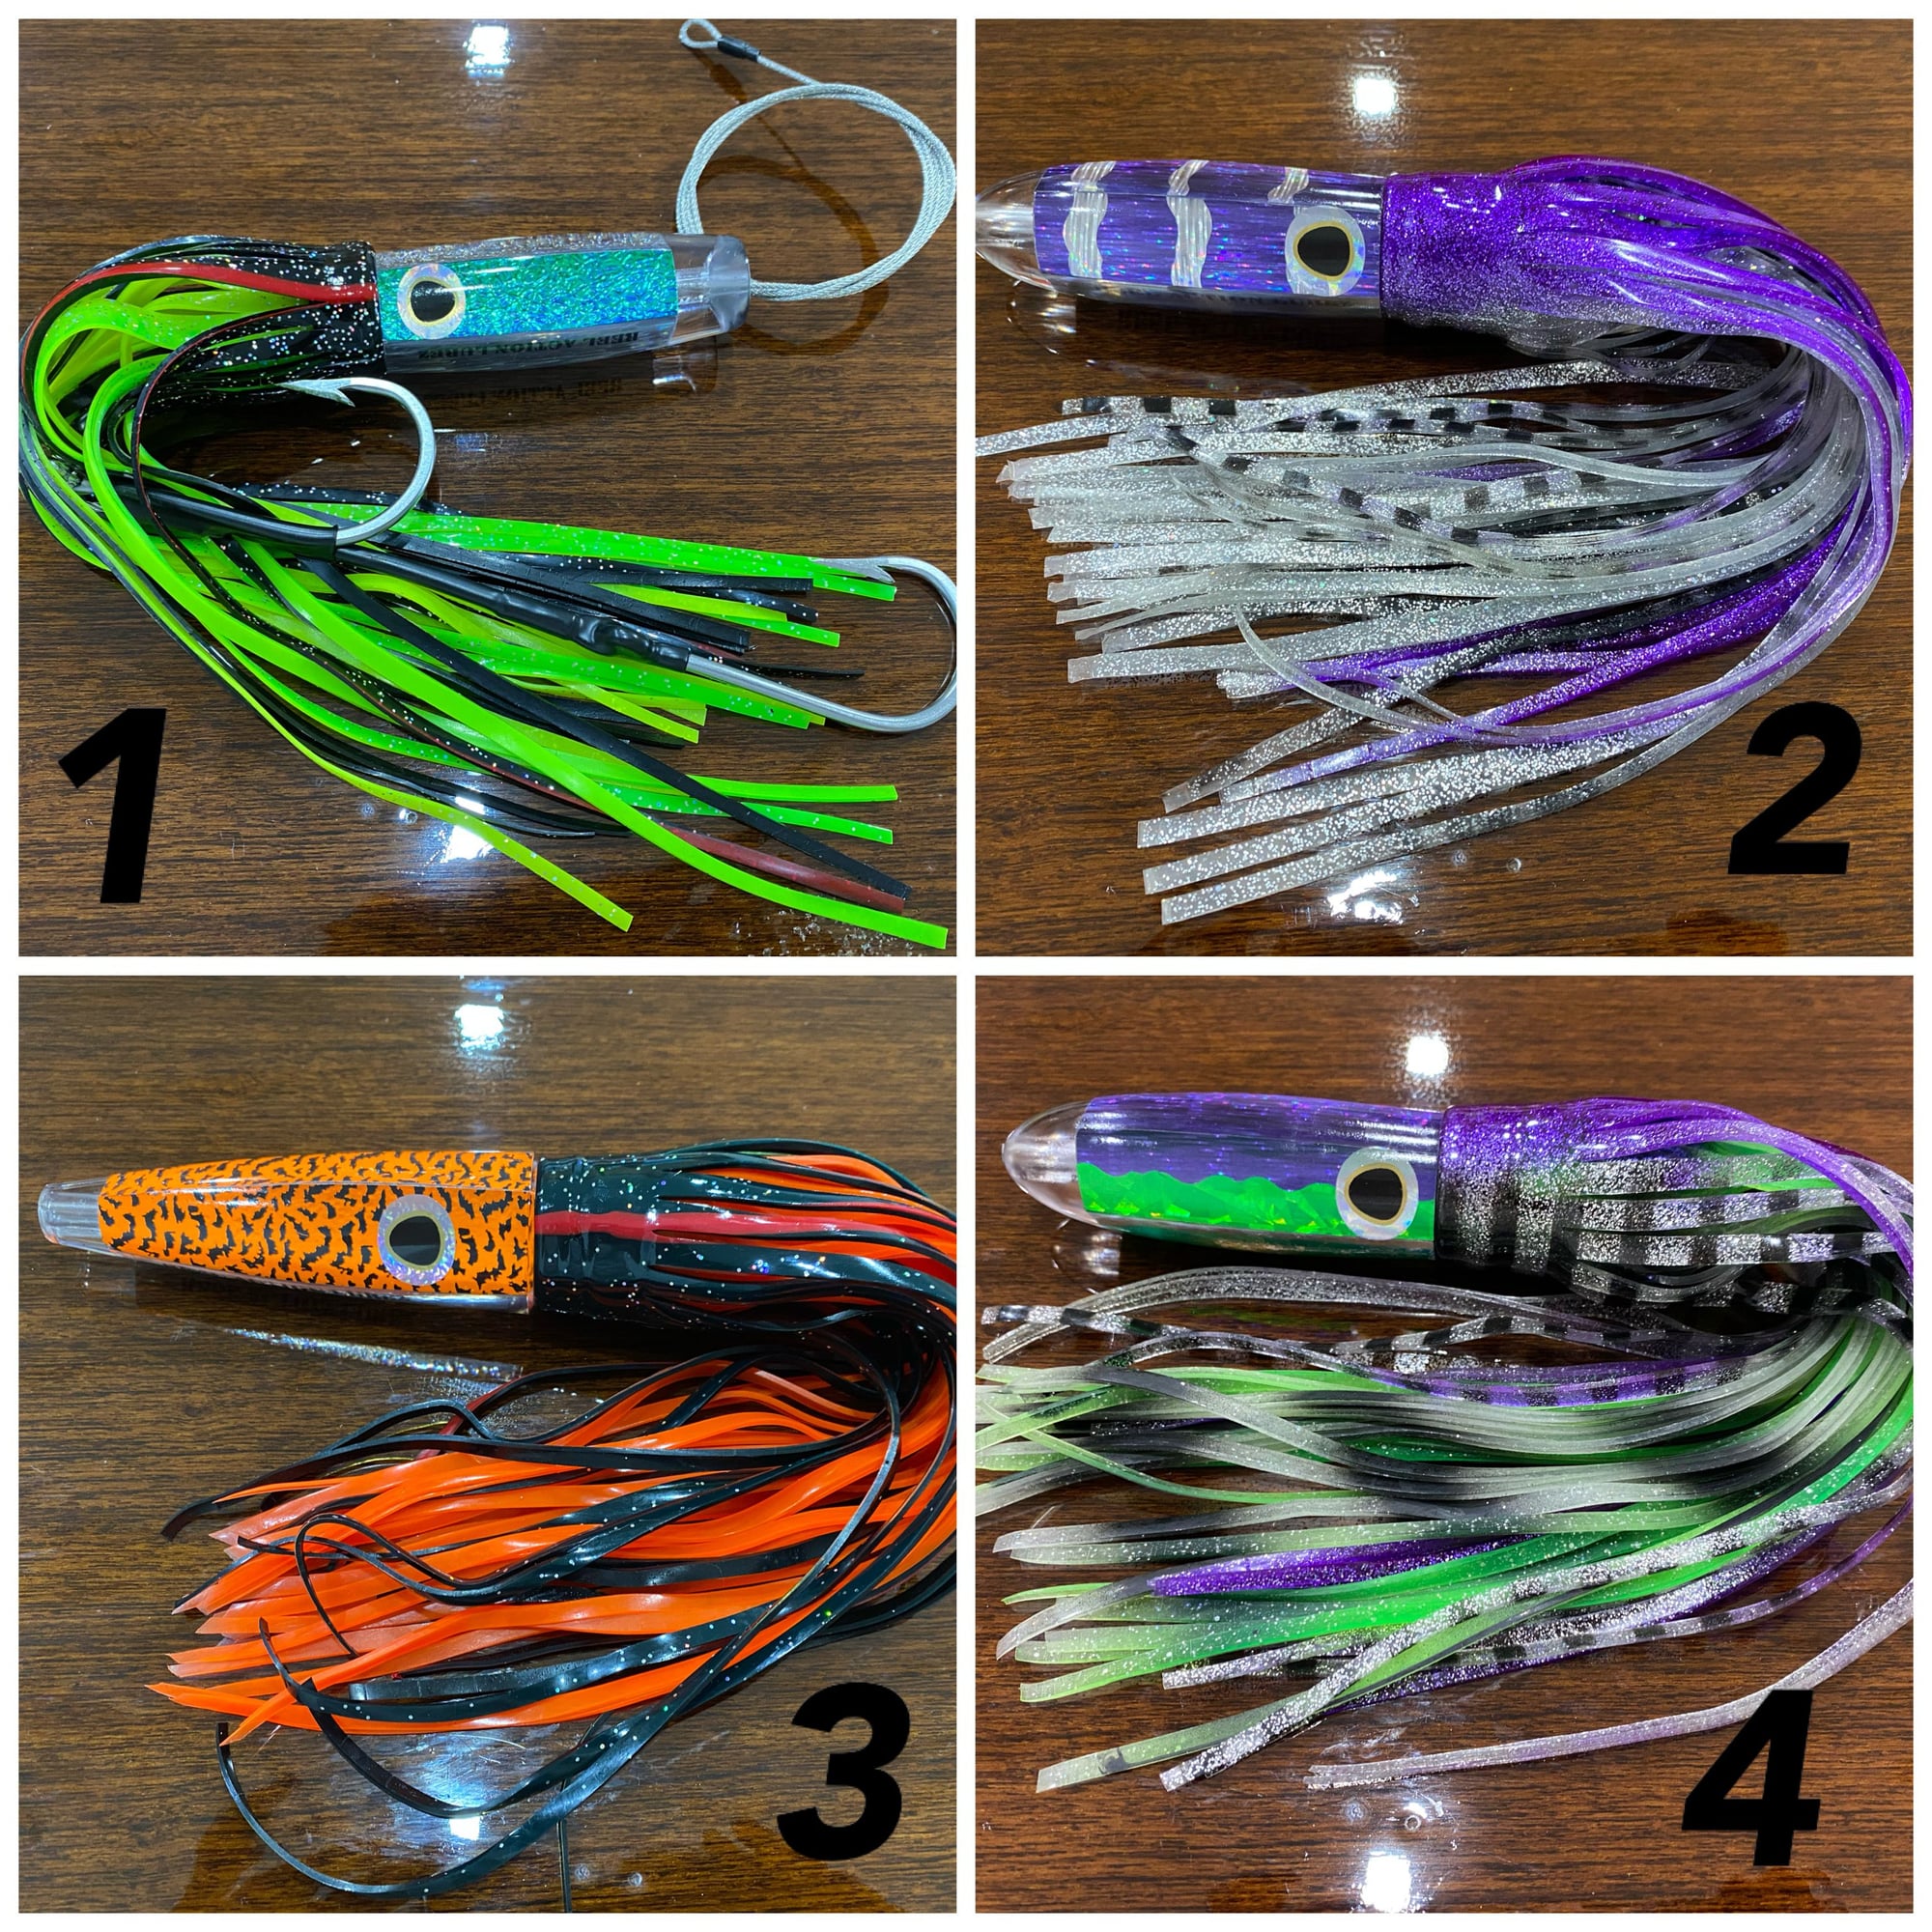 Are You Using This Lure? - The Hull Truth - Boating and Fishing Forum